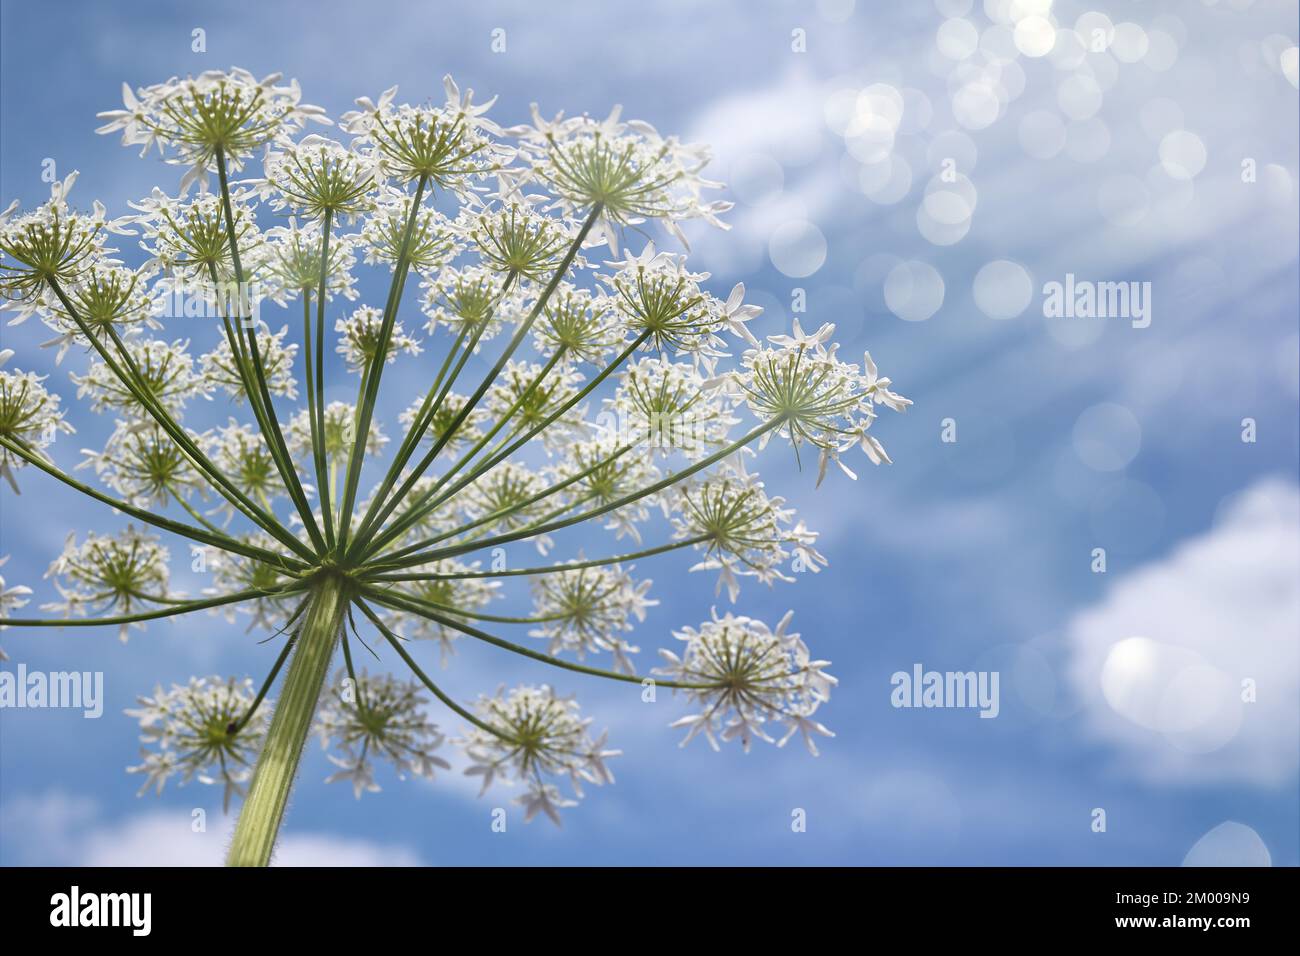 Natural plant background. Cow parsnip (Heracleum lanatum) against a blue sky with clouds, view from below. Sun rays and bokeh overlay, copy space. Stock Photo